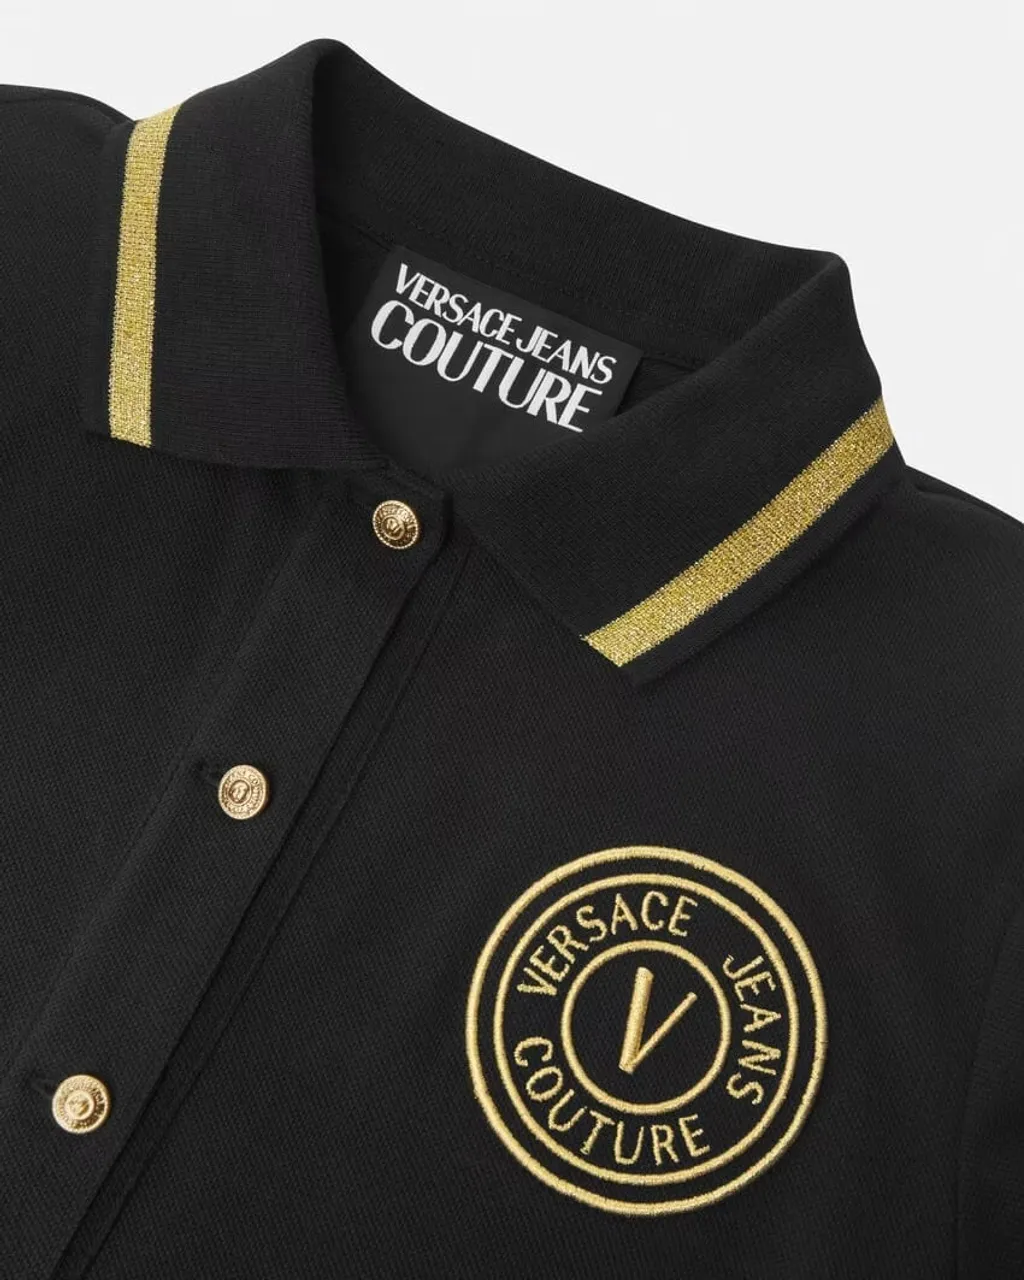 Versace Jeans Versace jeans couture dress polo gold